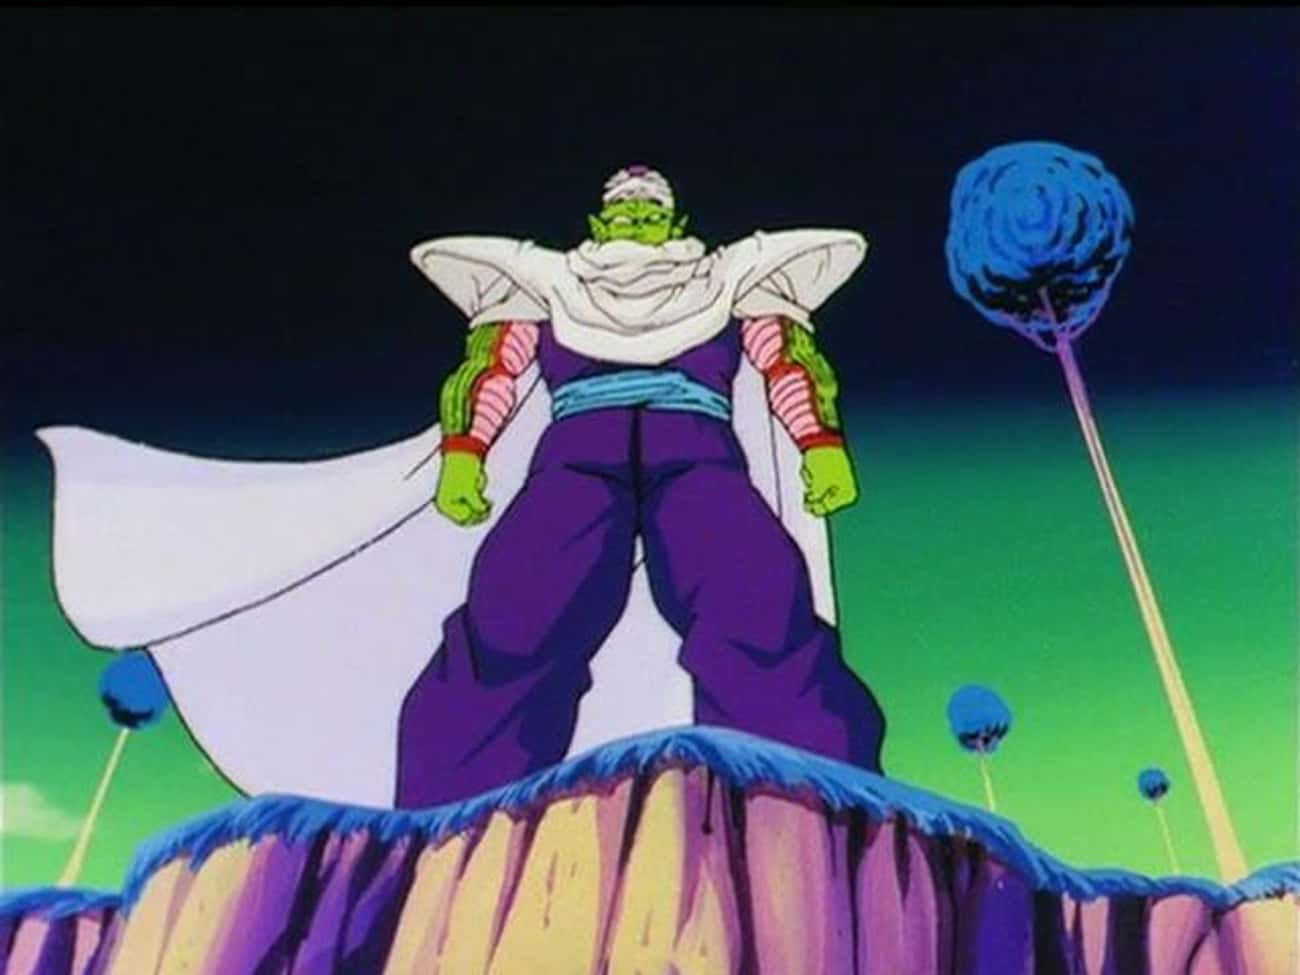 His Name Means ‘Another World’ In Namekian